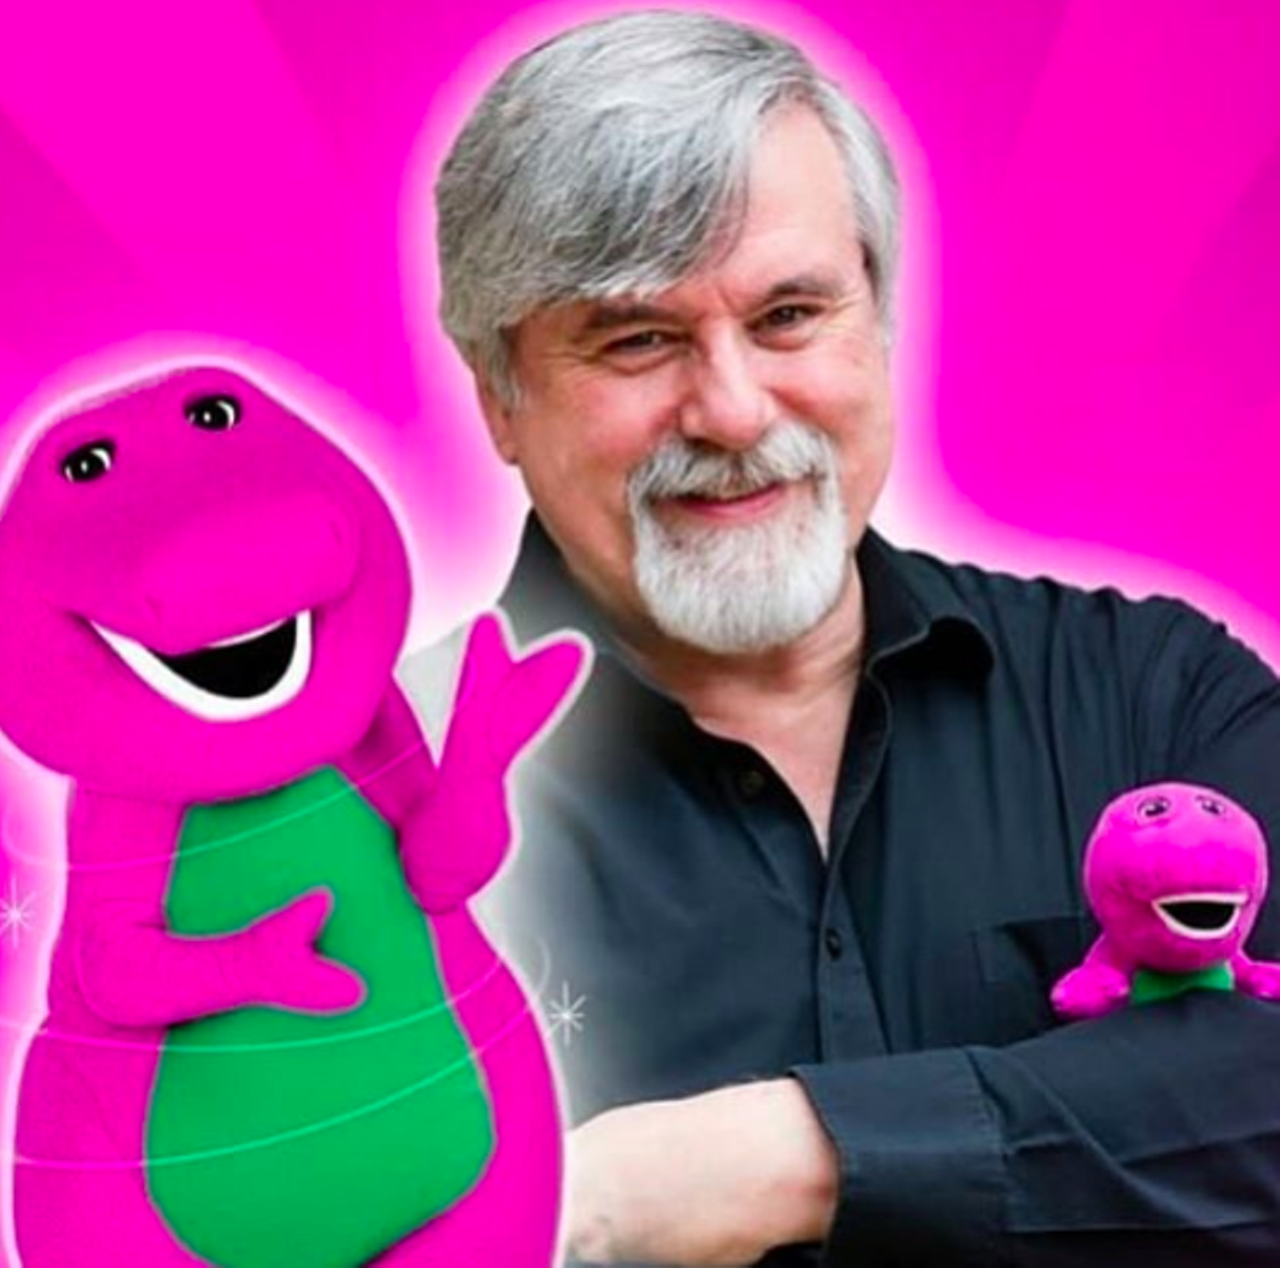 Bob West
Though you probably wouldn’t recognize his face, actor Bob West is definitely recognizable for his voice. As the man who first voiced Barney, Bob West brought to life the world of the bright purple dinosaur on Barney & Friends after attending Trinity University.. From 1988 to 2001, West provided the voice and did other voice work.
Photo via Instagram / sanchezmasun